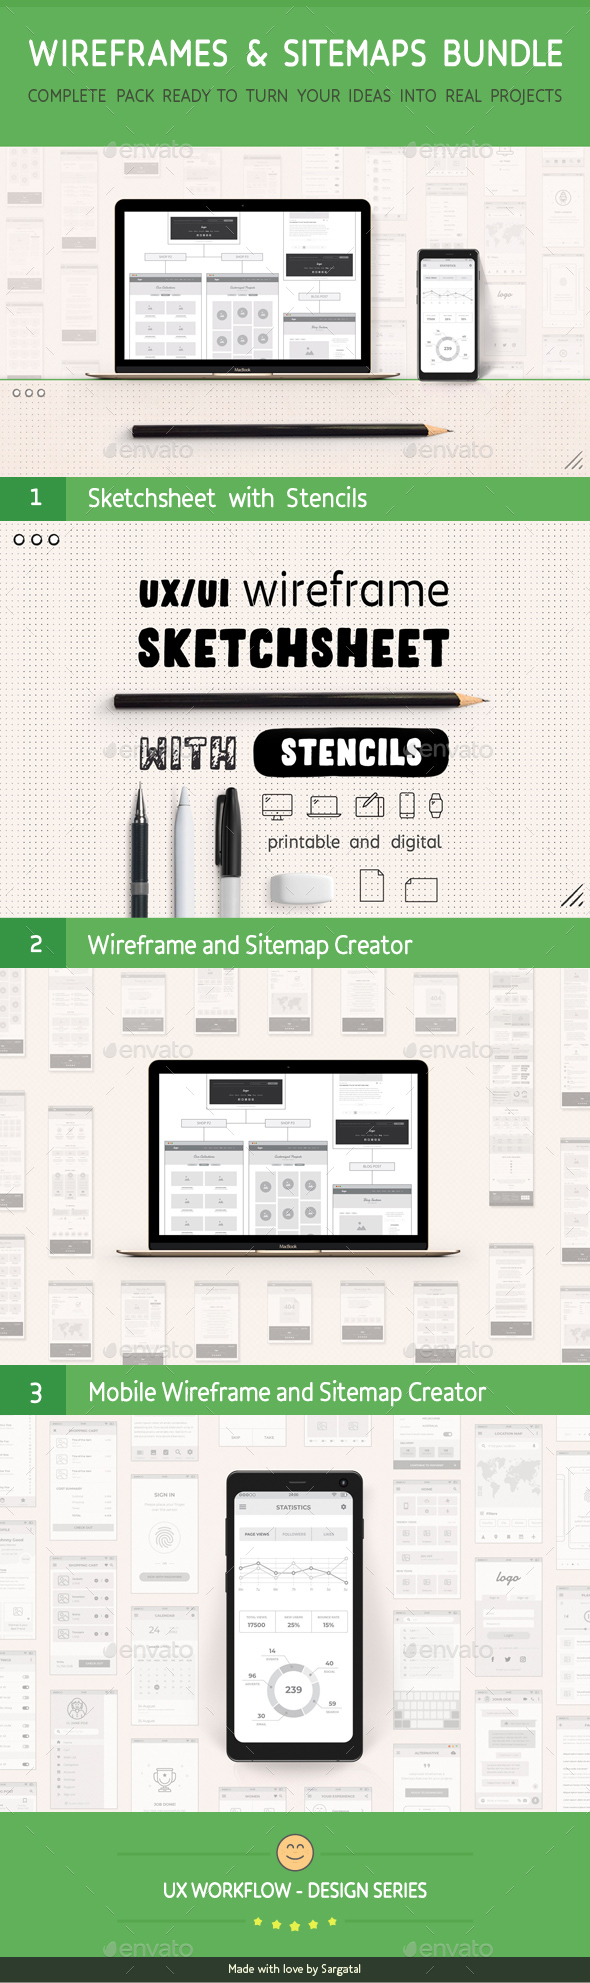 UX Workflow - Wireframes and Sitemaps Bundle